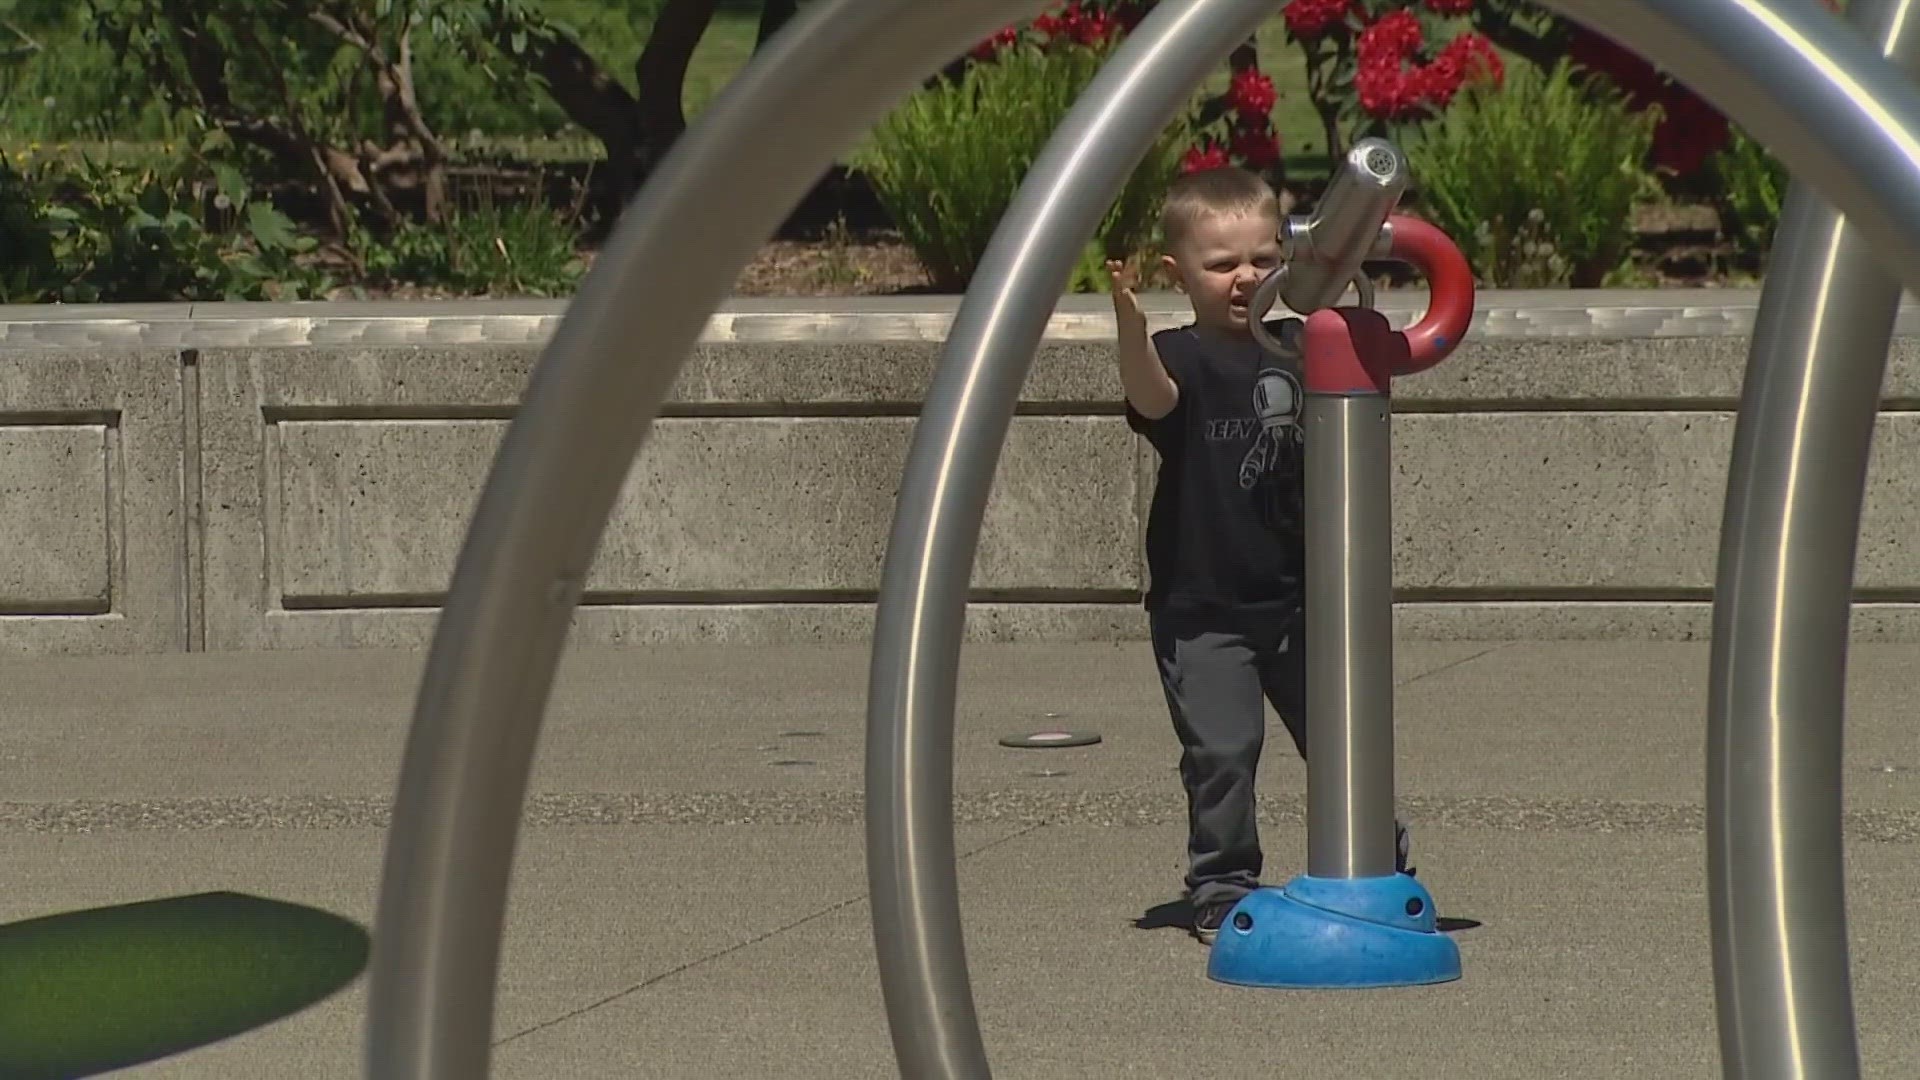 Although an Excessive Heat Advisory is looming for parts of western Washington this weekend, not all spray parks will be open to the public.